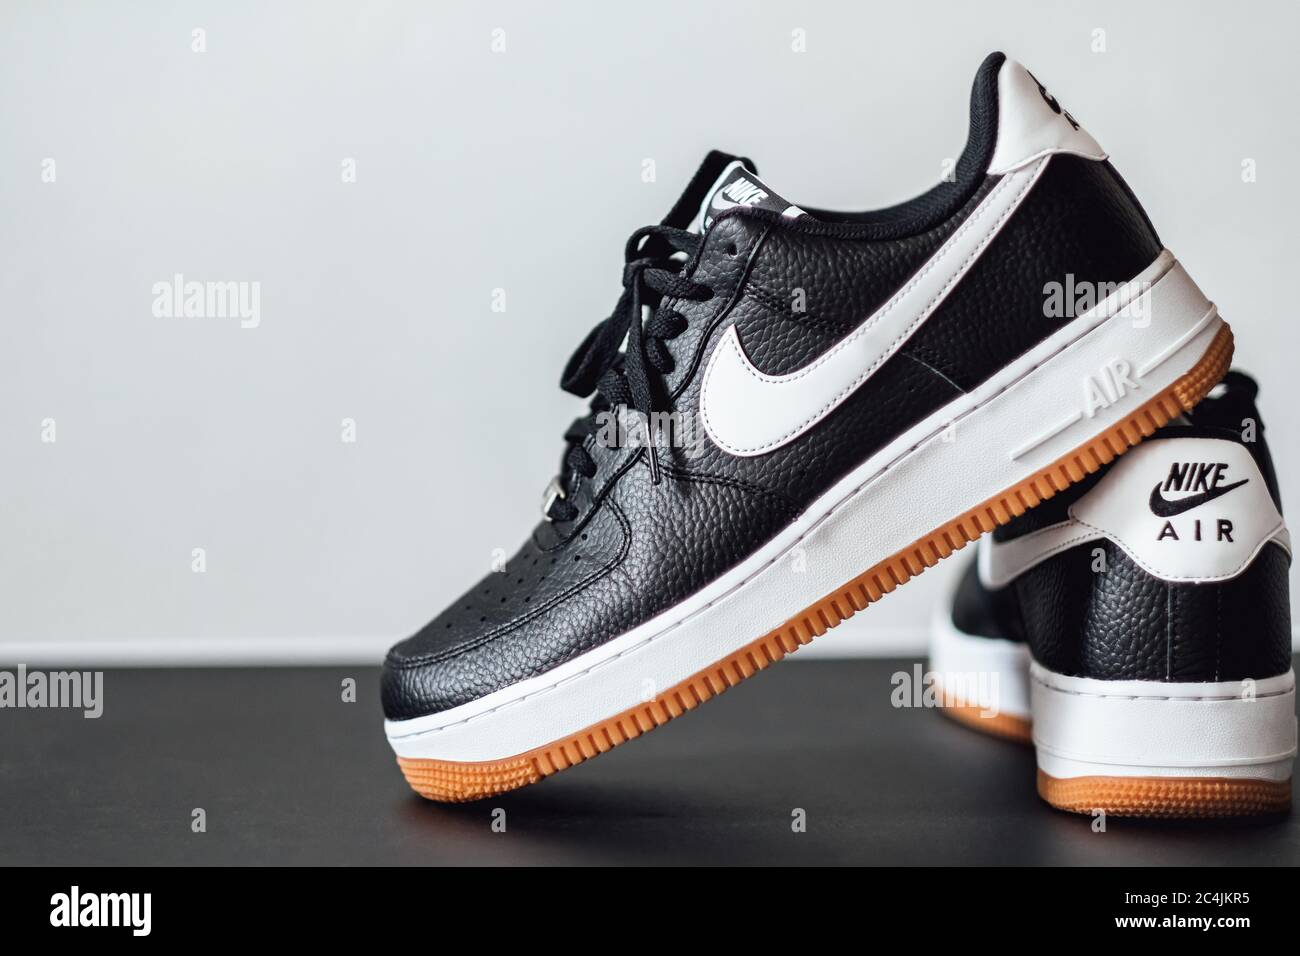 Nike Air Force 1 Low 07. Nike Sneaker Life Style Stock Photo - Alamy